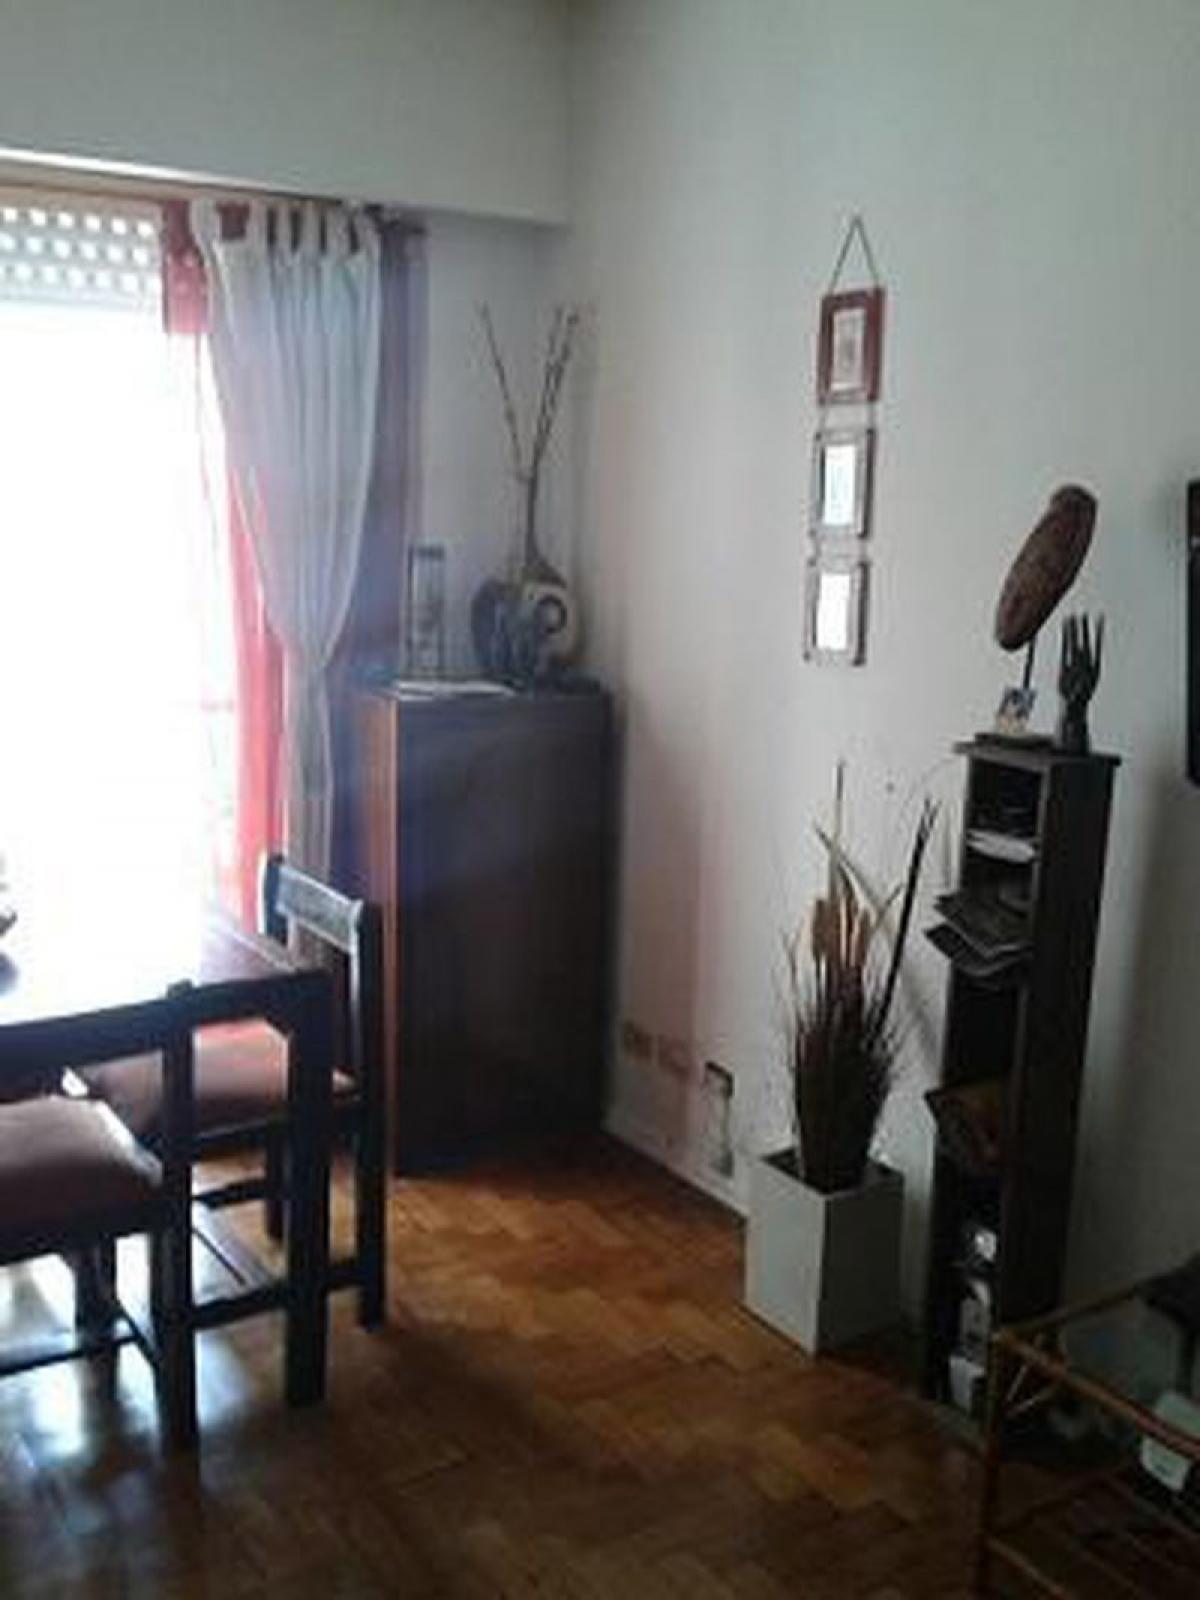 Picture of Apartment For Sale in Lomas De Zamora, Buenos Aires, Argentina